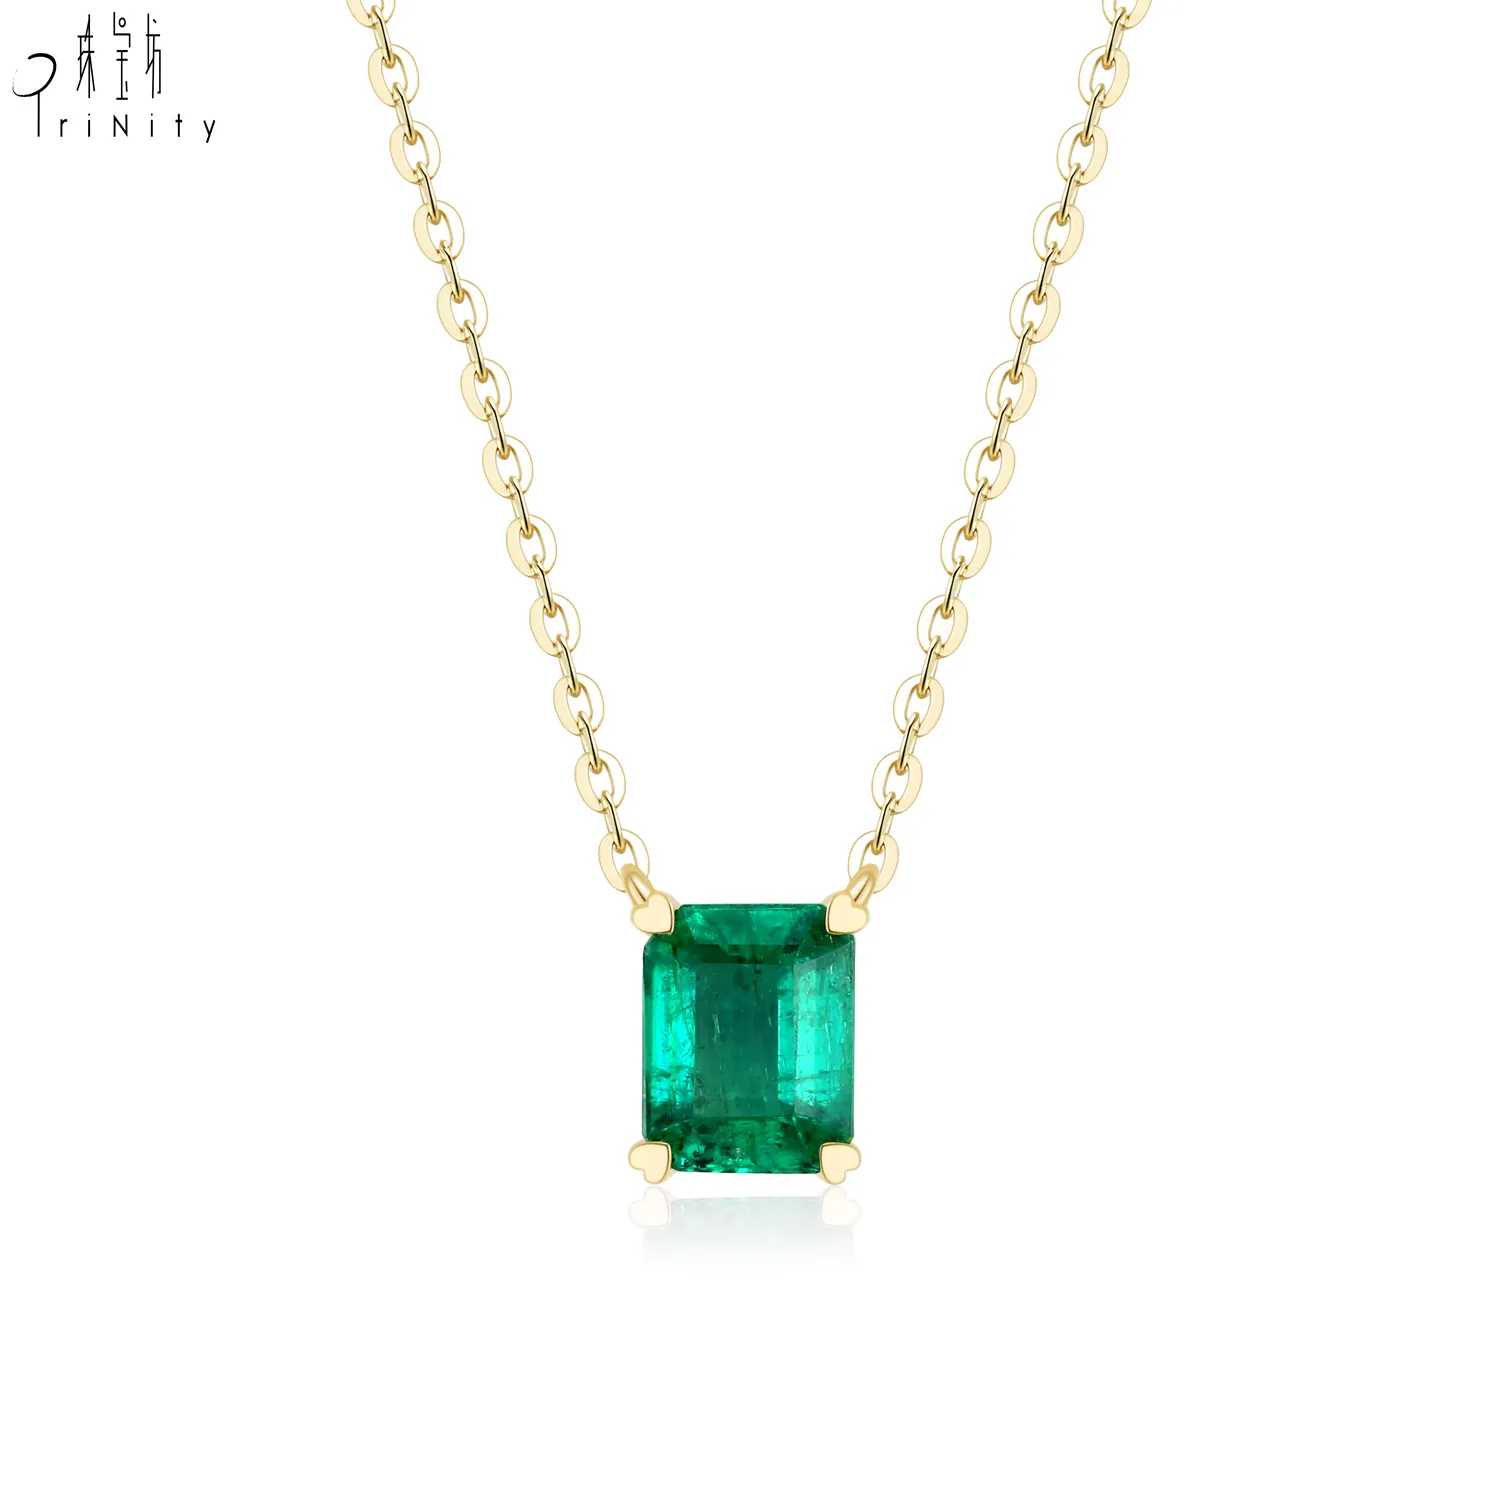 Factory Necklace New Arrival Elegant Jewelry Fancy Necklace Design 18K Yellow Gold Real Natural Emerald Pendant Necklace For Women